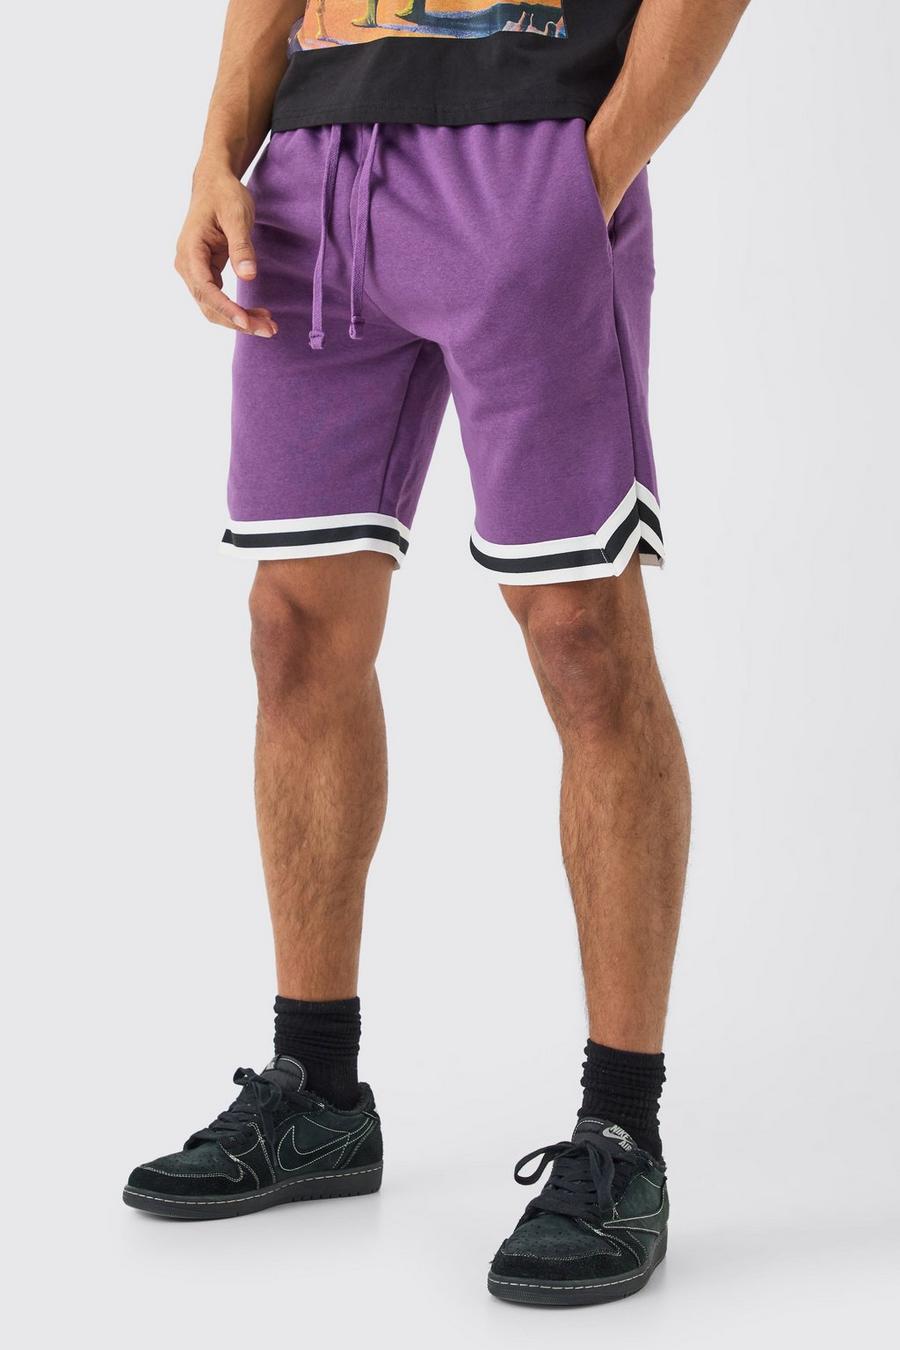 Loose Fit Mid Length Basketball Short